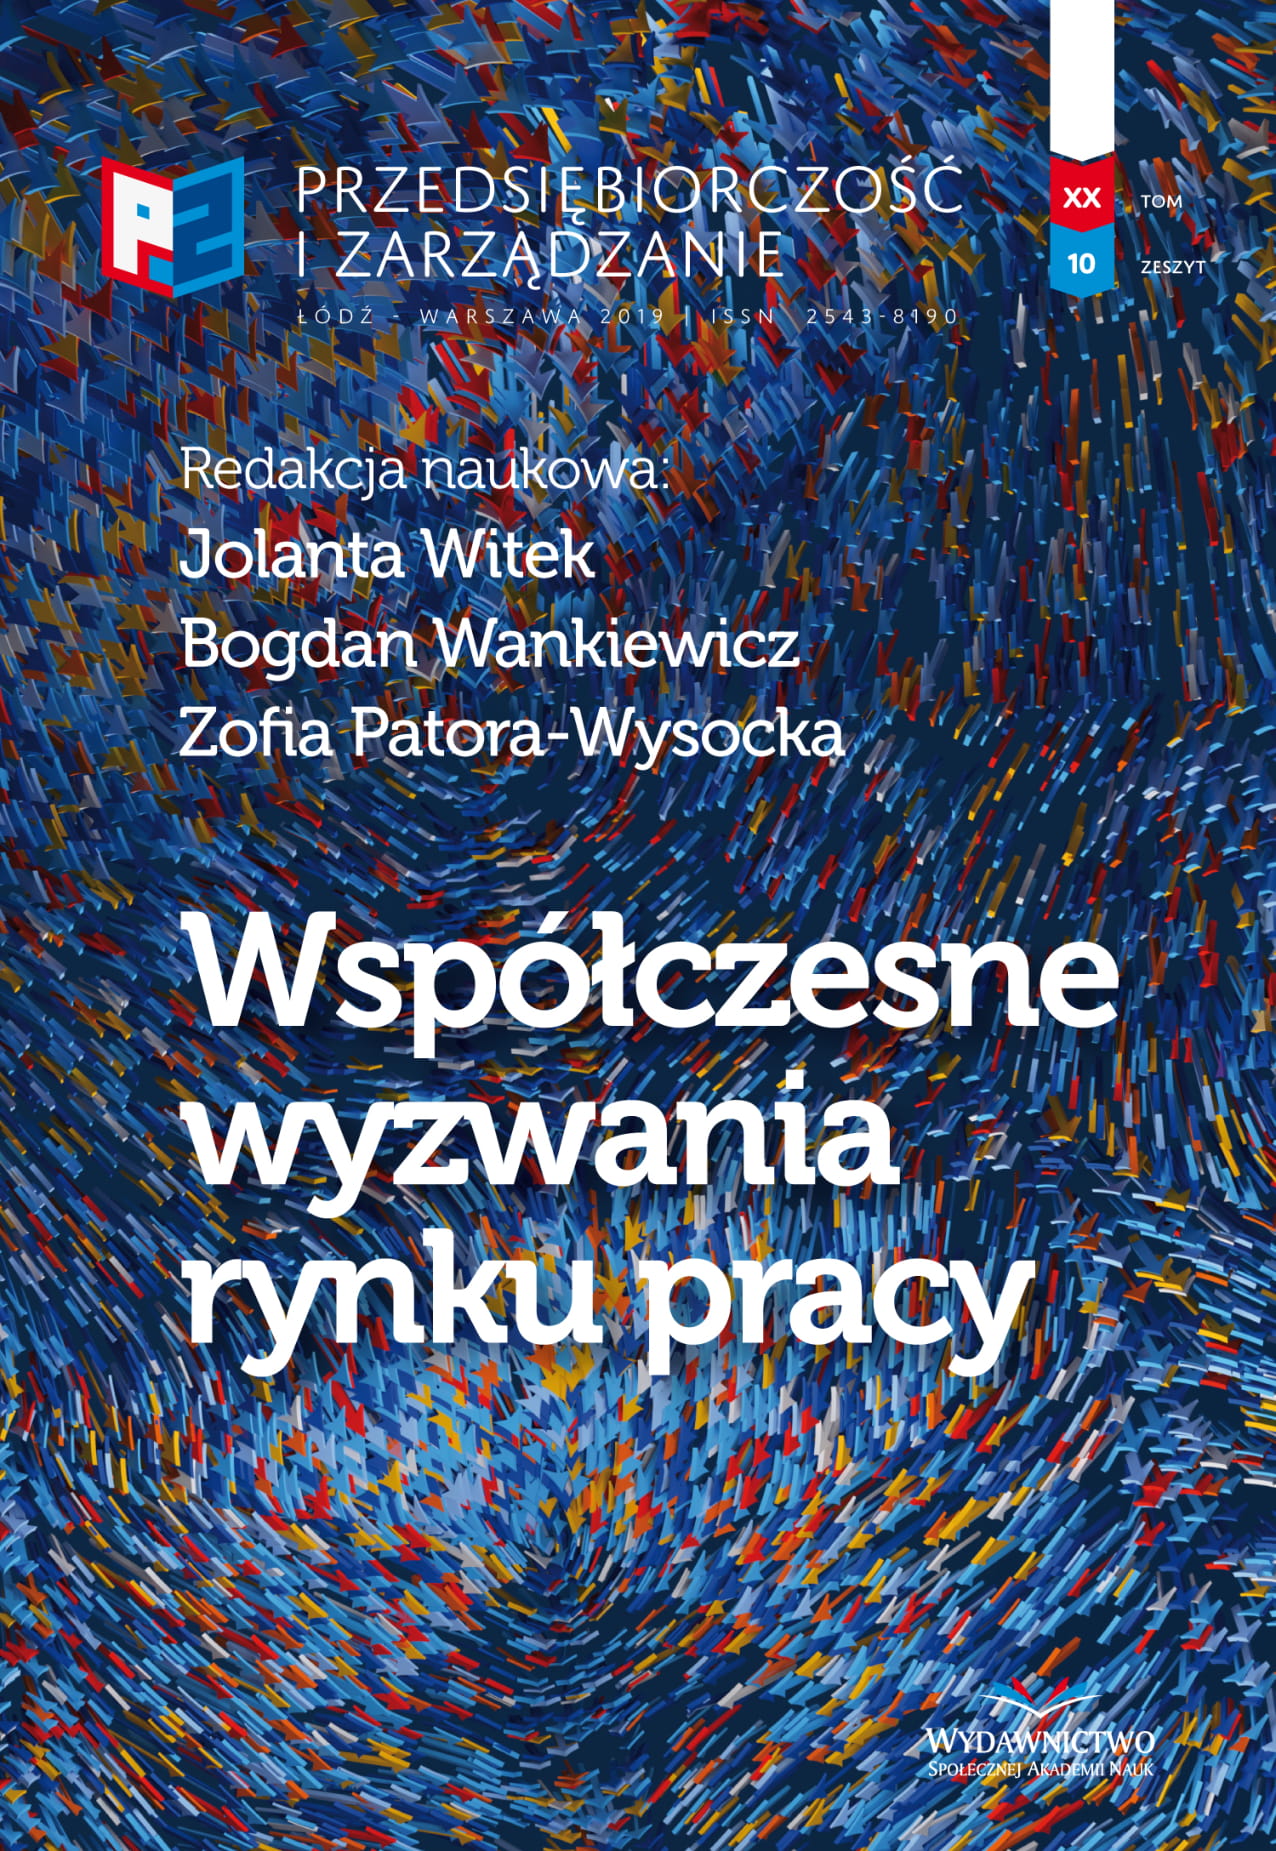 Labour Market in Podkarpackie Voivodeship – Chosen Problems Cover Image